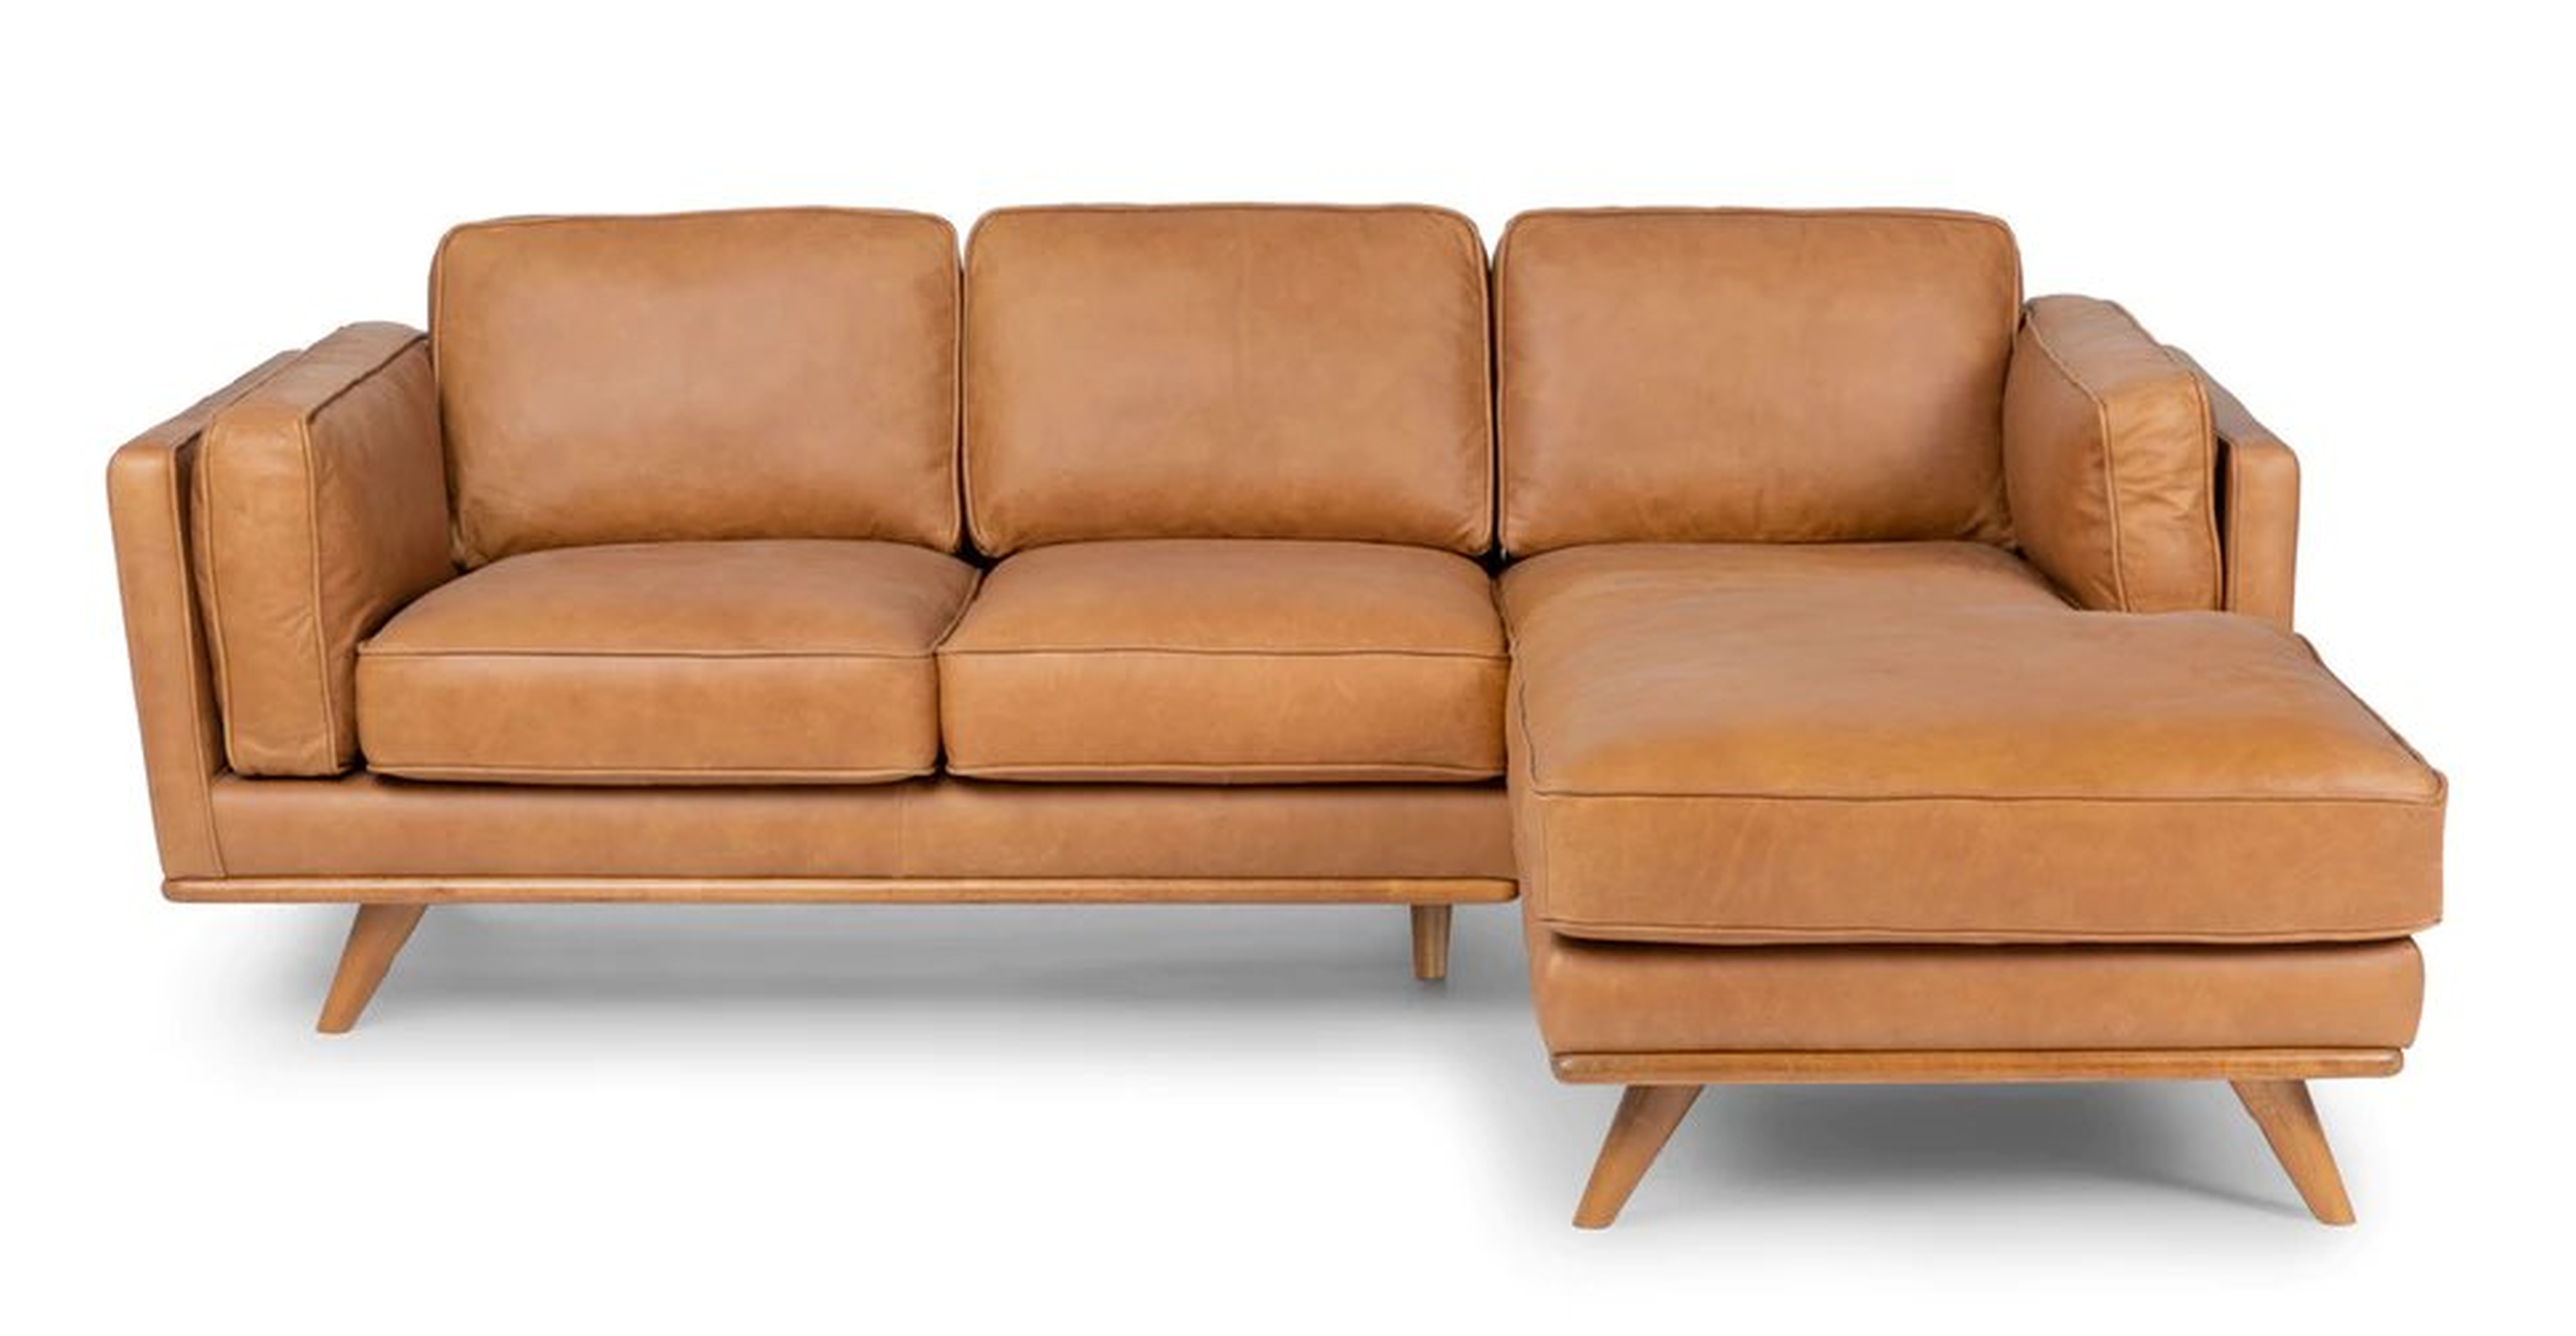 Timber Charme Tan Right Sectional - Article